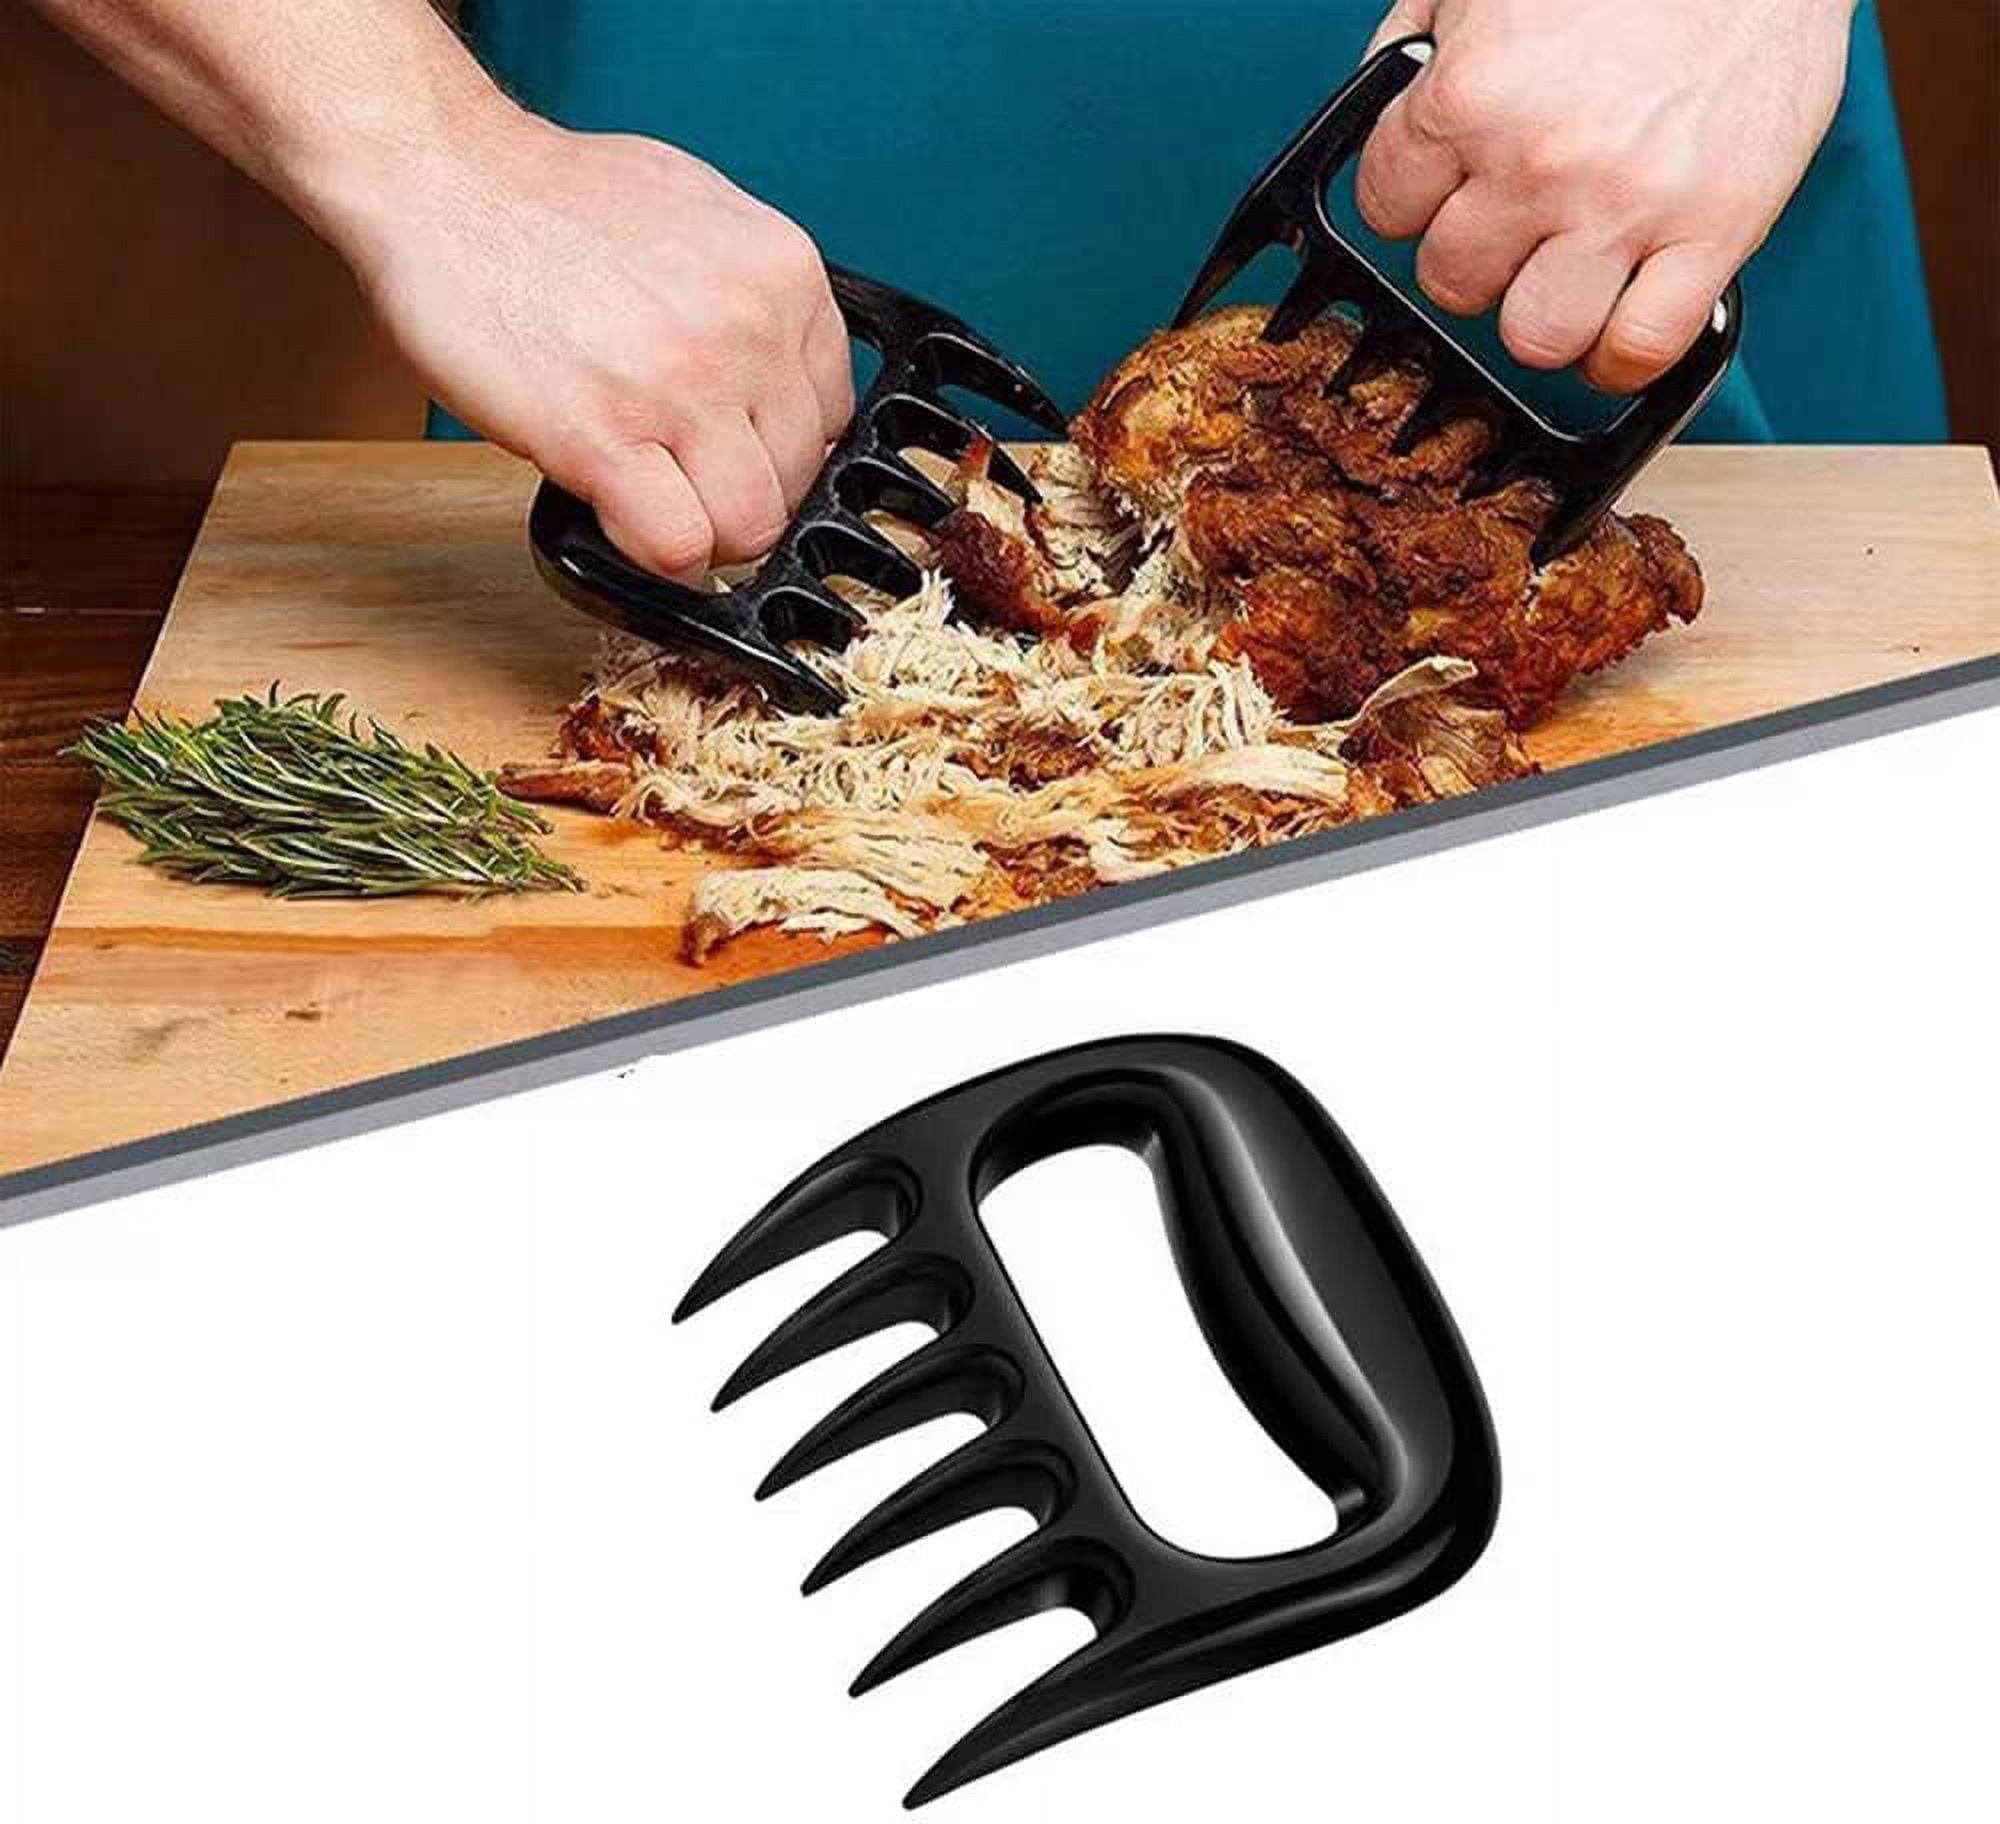 Dropship Set Of 2 Bear Claw Pulled Meat Shredder Claws Stainless